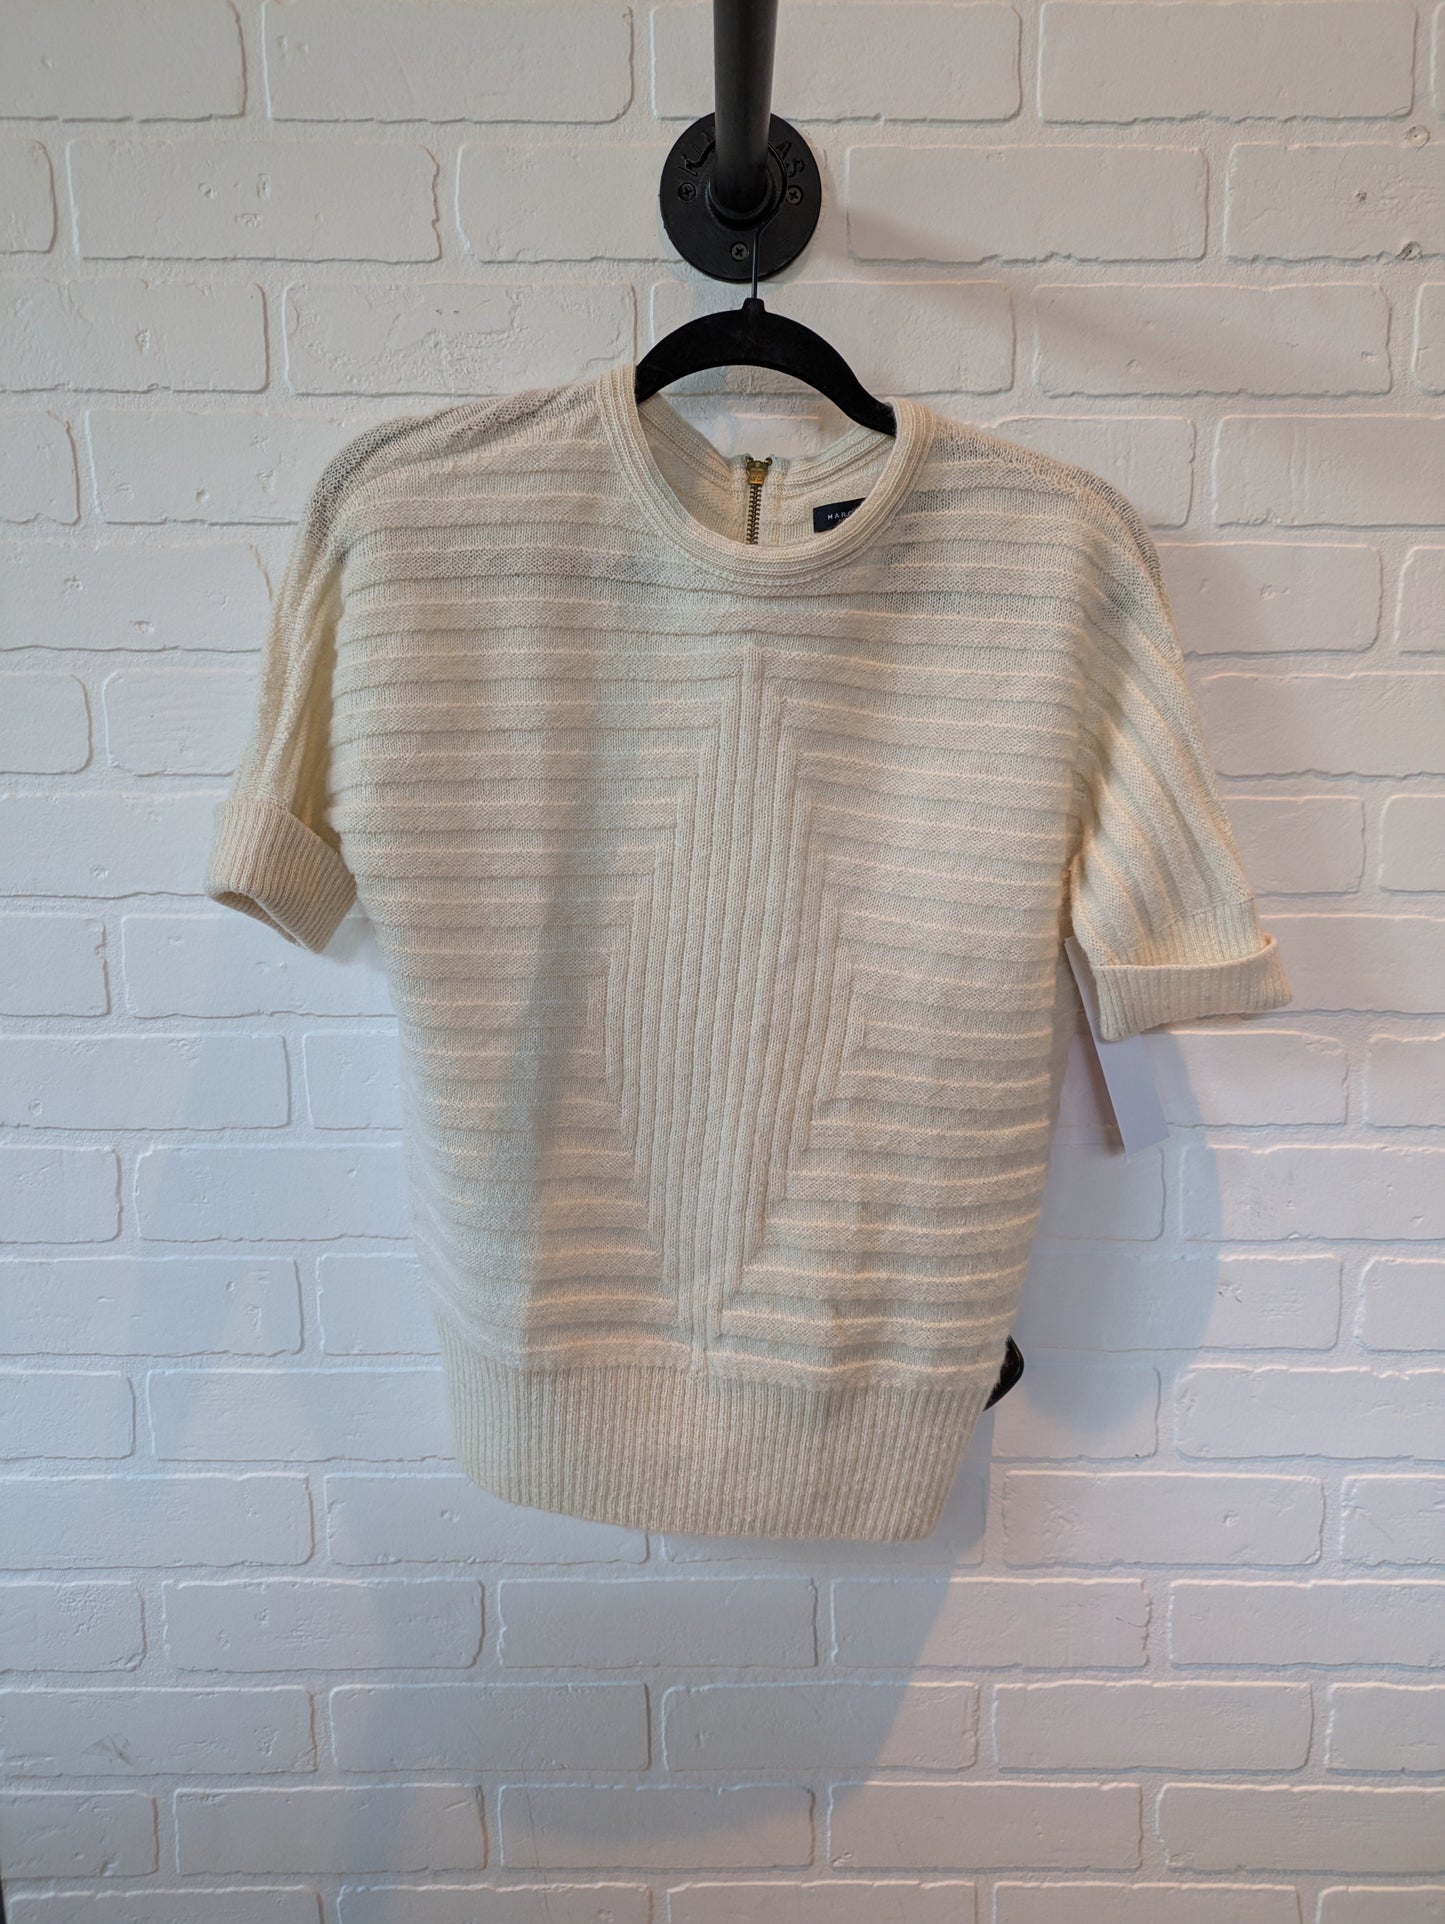 Cream Sweater Designer Marc By Marc Jacobs, Size M